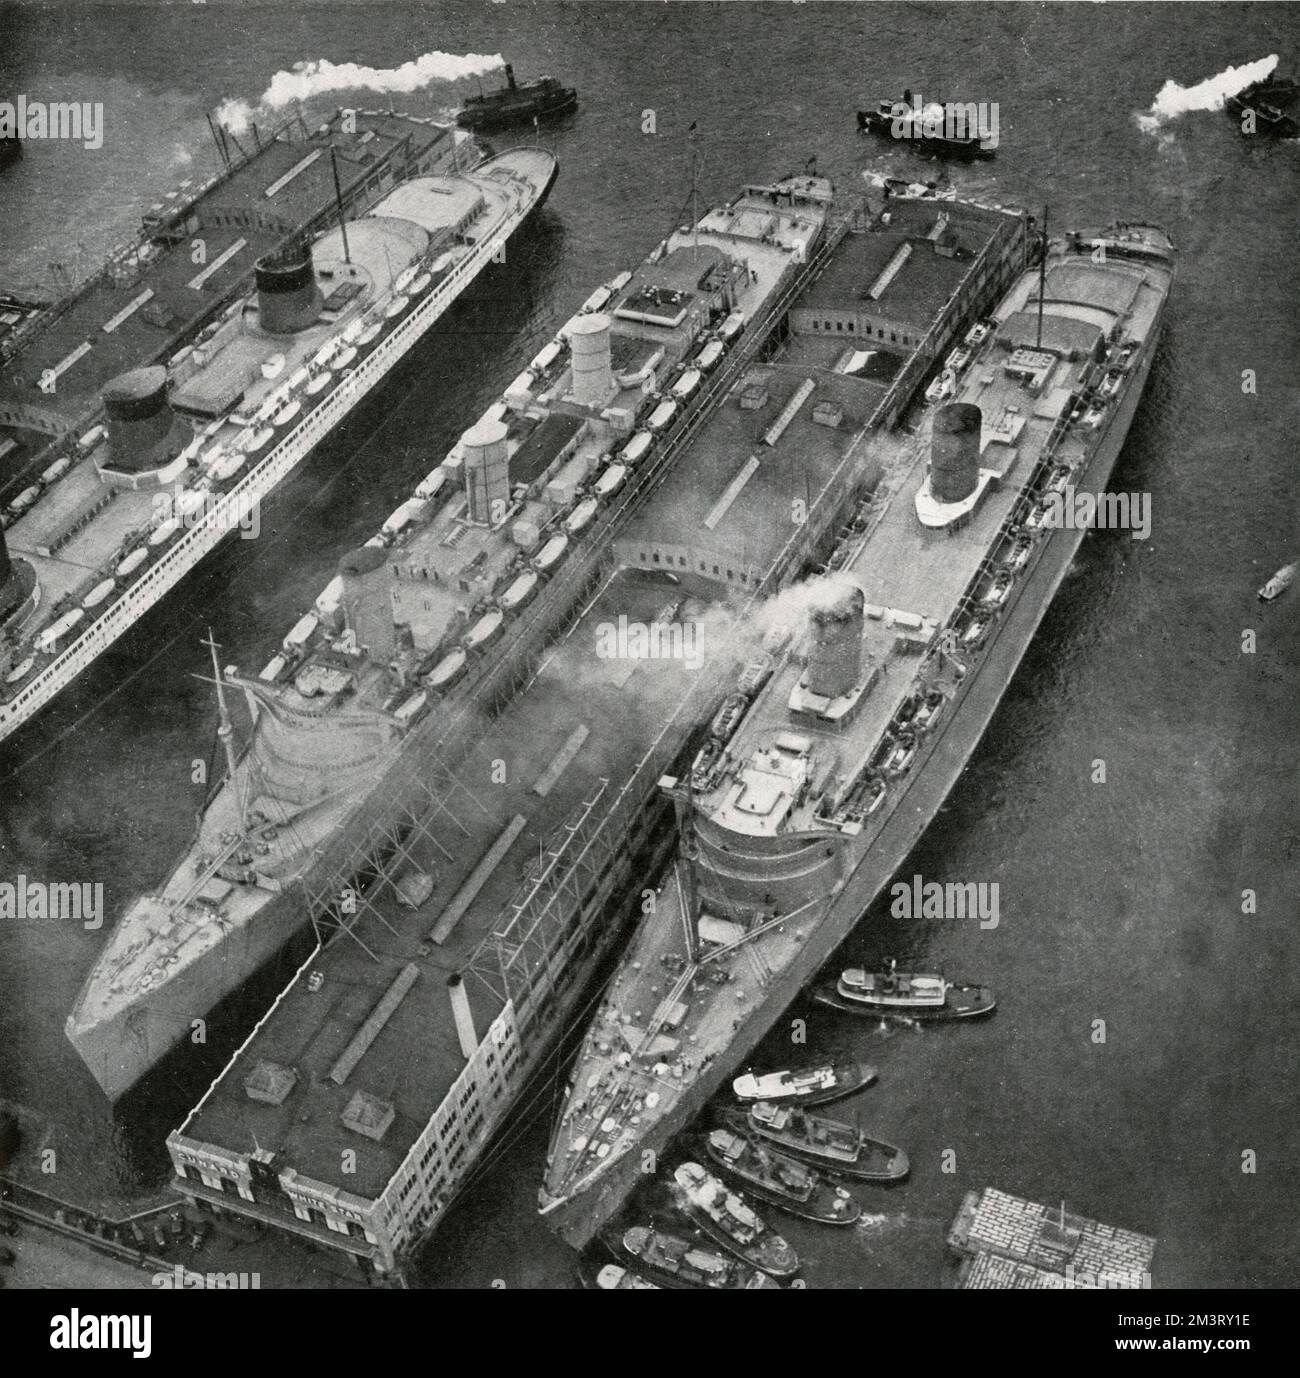 The Queen Elizabeth, SS Normandie and Queen Mary - the three fastest liners in the world - alongside each other in dock at New York Harbour - March 1940.  1940 Stock Photo